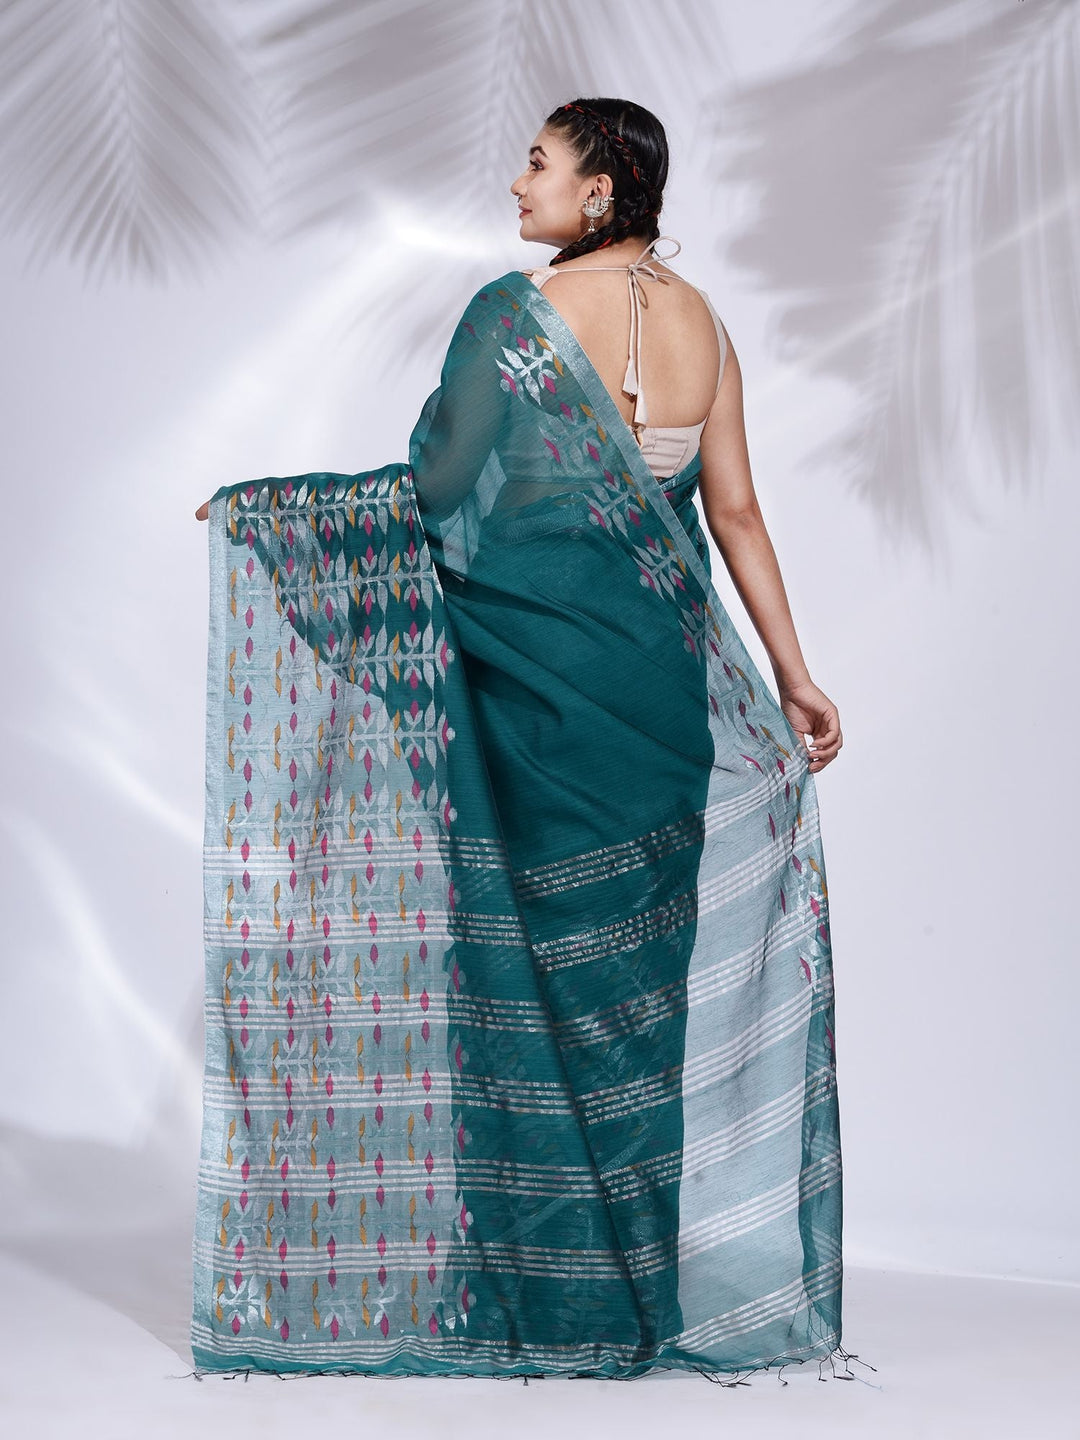 CHARUKRITI Teal Blended Cotton Handwoven Saree with Nakshi Border with Unstitched Blouse